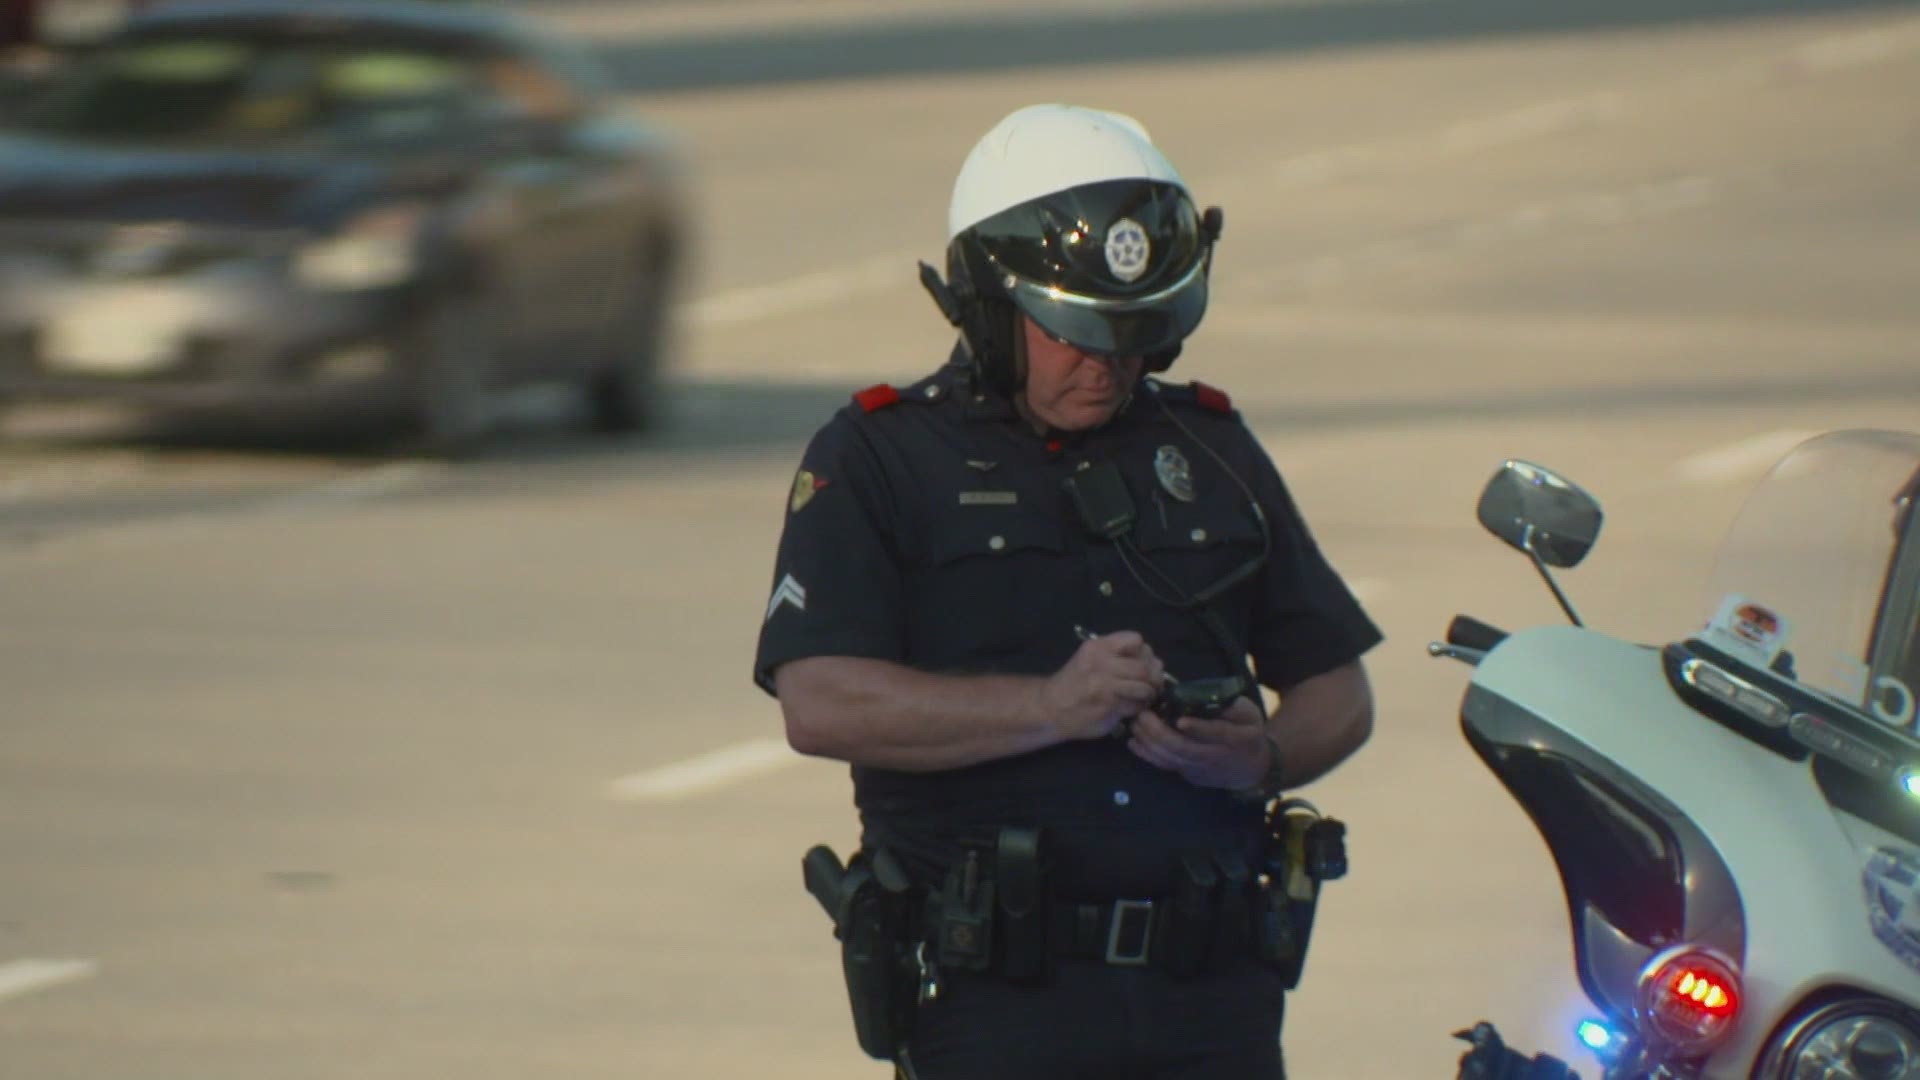 Dallas police say they've written more than 300 tickets to aggressive drivers just this month.